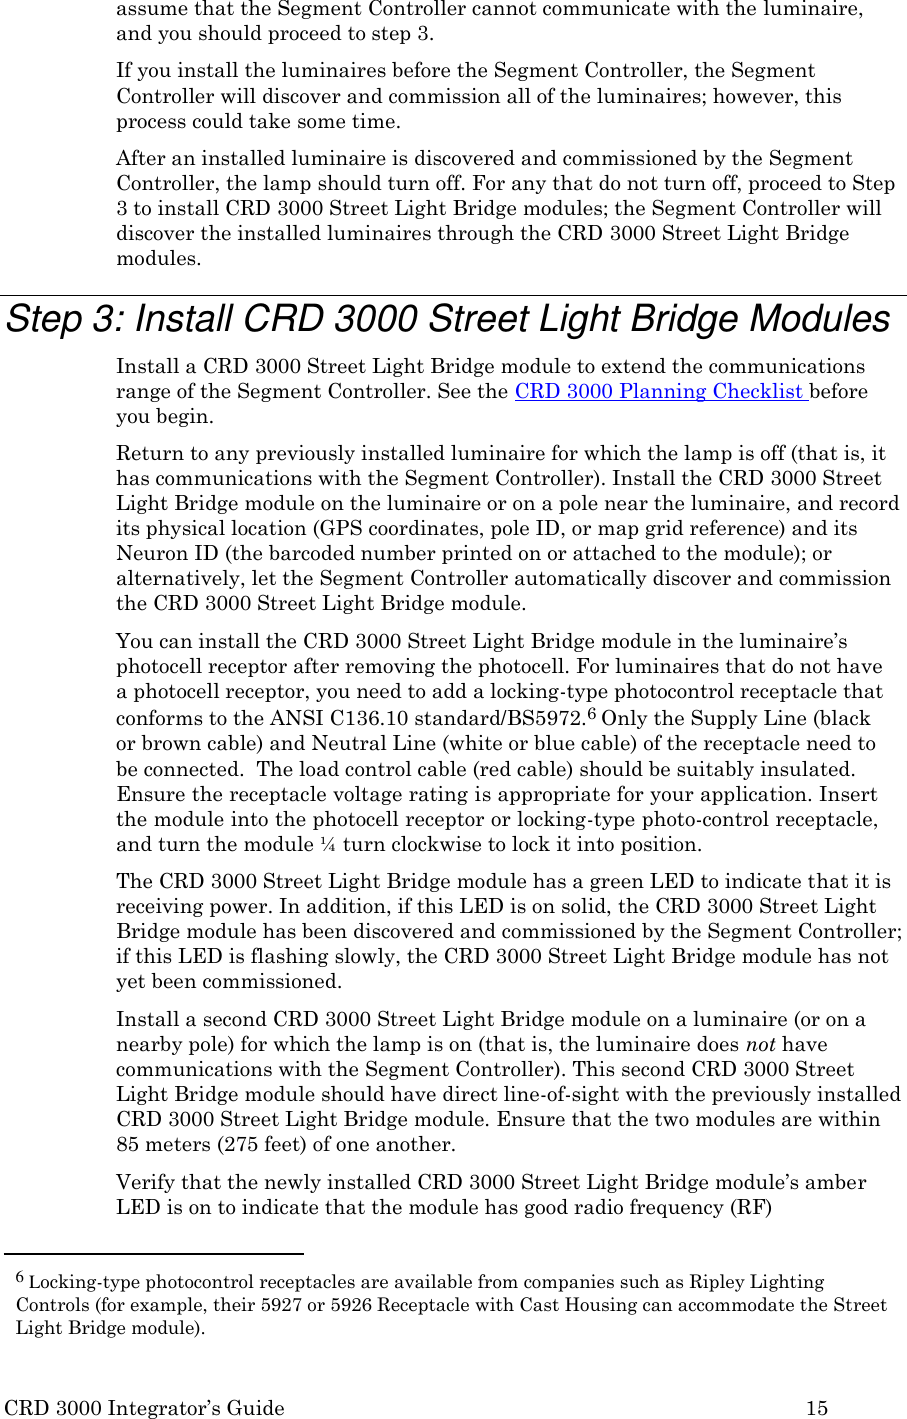 CRD 3000 Integrator’s Guide 15  assume that the Segment Controller cannot communicate with the luminaire, and you should proceed to step 3. If you install the luminaires before the Segment Controller, the Segment Controller will discover and commission all of the luminaires; however, this process could take some time. After an installed luminaire is discovered and commissioned by the Segment Controller, the lamp should turn off. For any that do not turn off, proceed to Step 3 to install CRD 3000 Street Light Bridge modules; the Segment Controller will discover the installed luminaires through the CRD 3000 Street Light Bridge modules.  Step 3: Install CRD 3000 Street Light Bridge Modules Install a CRD 3000 Street Light Bridge module to extend the communications range of the Segment Controller. See the CRD 3000 Planning Checklist before you begin. Return to any previously installed luminaire for which the lamp is off (that is, it has communications with the Segment Controller). Install the CRD 3000 Street Light Bridge module on the luminaire or on a pole near the luminaire, and record its physical location (GPS coordinates, pole ID, or map grid reference) and its Neuron ID (the barcoded number printed on or attached to the module); or alternatively, let the Segment Controller automatically discover and commission the CRD 3000 Street Light Bridge module. You can install the CRD 3000 Street Light Bridge module in the luminaire’s photocell receptor after removing the photocell. For luminaires that do not have a photocell receptor, you need to add a locking-type photocontrol receptacle that conforms to the ANSI C136.10 standard/BS5972.6 Only the Supply Line (black or brown cable) and Neutral Line (white or blue cable) of the receptacle need to be connected.  The load control cable (red cable) should be suitably insulated. Ensure the receptacle voltage rating is appropriate for your application. Insert the module into the photocell receptor or locking-type photo-control receptacle, and turn the module ¼ turn clockwise to lock it into position. The CRD 3000 Street Light Bridge module has a green LED to indicate that it is receiving power. In addition, if this LED is on solid, the CRD 3000 Street Light Bridge module has been discovered and commissioned by the Segment Controller; if this LED is flashing slowly, the CRD 3000 Street Light Bridge module has not yet been commissioned. Install a second CRD 3000 Street Light Bridge module on a luminaire (or on a nearby pole) for which the lamp is on (that is, the luminaire does not have communications with the Segment Controller). This second CRD 3000 Street Light Bridge module should have direct line-of-sight with the previously installed CRD 3000 Street Light Bridge module. Ensure that the two modules are within 85 meters (275 feet) of one another. Verify that the newly installed CRD 3000 Street Light Bridge module’s amber LED is on to indicate that the module has good radio frequency (RF)  6 Locking-type photocontrol receptacles are available from companies such as Ripley Lighting Controls (for example, their 5927 or 5926 Receptacle with Cast Housing can accommodate the Street Light Bridge module). 